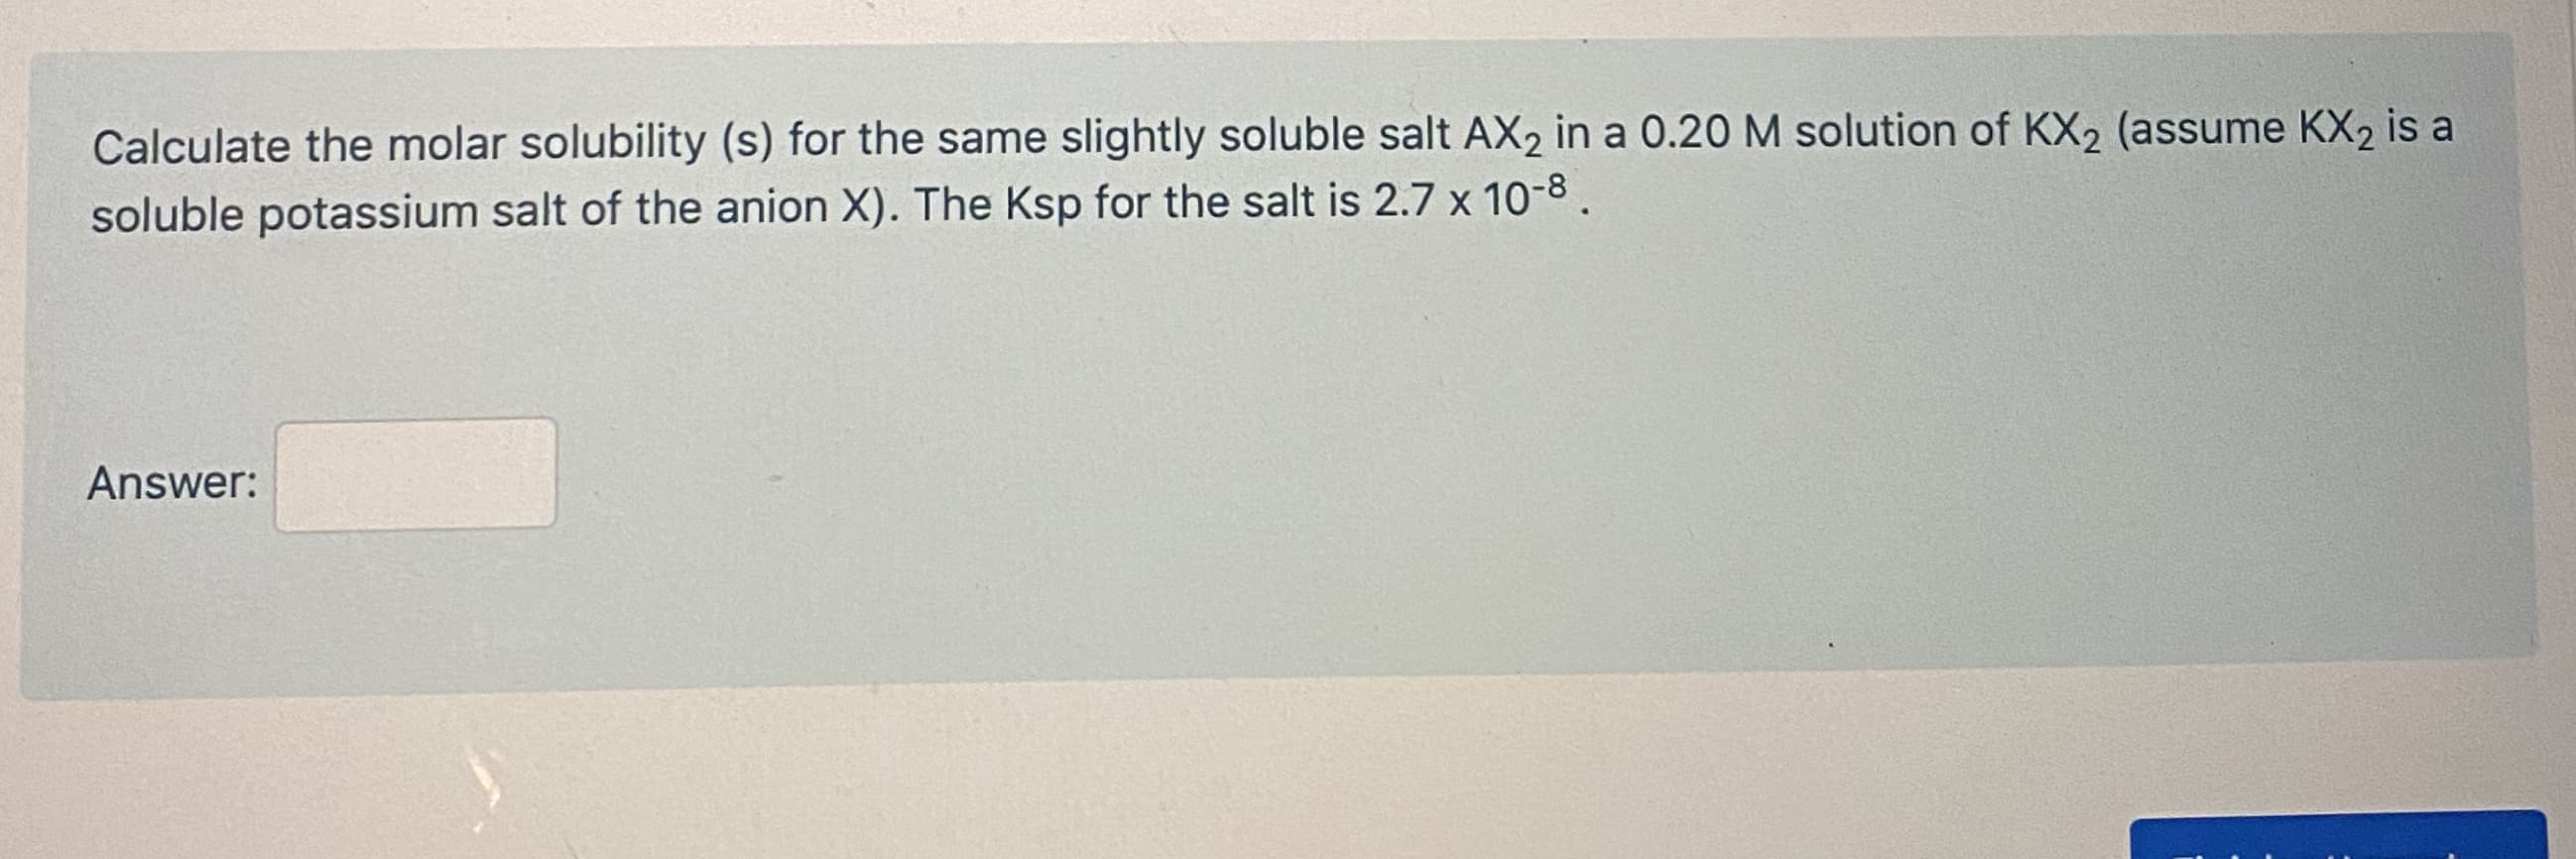 Calculate the molar solubility (s) for the same slightly soluble salt AX2 in a 0.20 M solution of KX2 (assume KX2 is a
soluble potassium salt of the anion X). The Ksp for the salt is 2.7 x 10-8.
